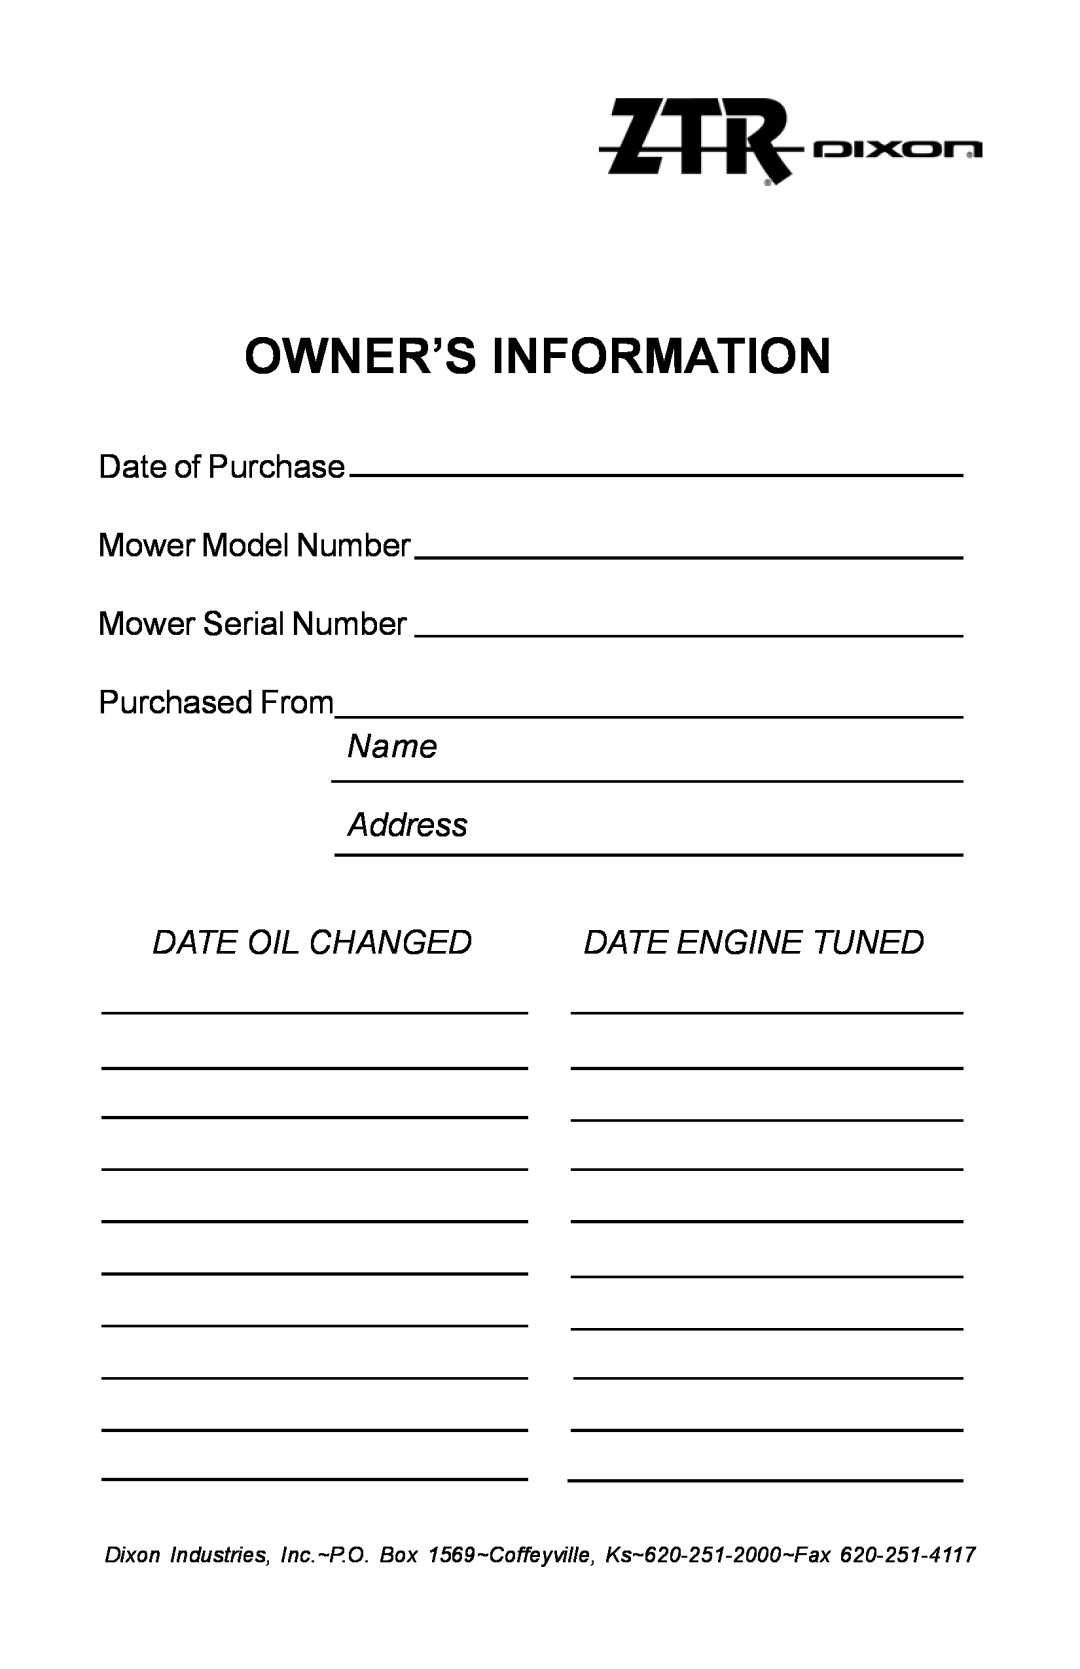 Dixon ZTR manual Owner’S Information, Name Address, Date Oil Changed, Date Engine Tuned 